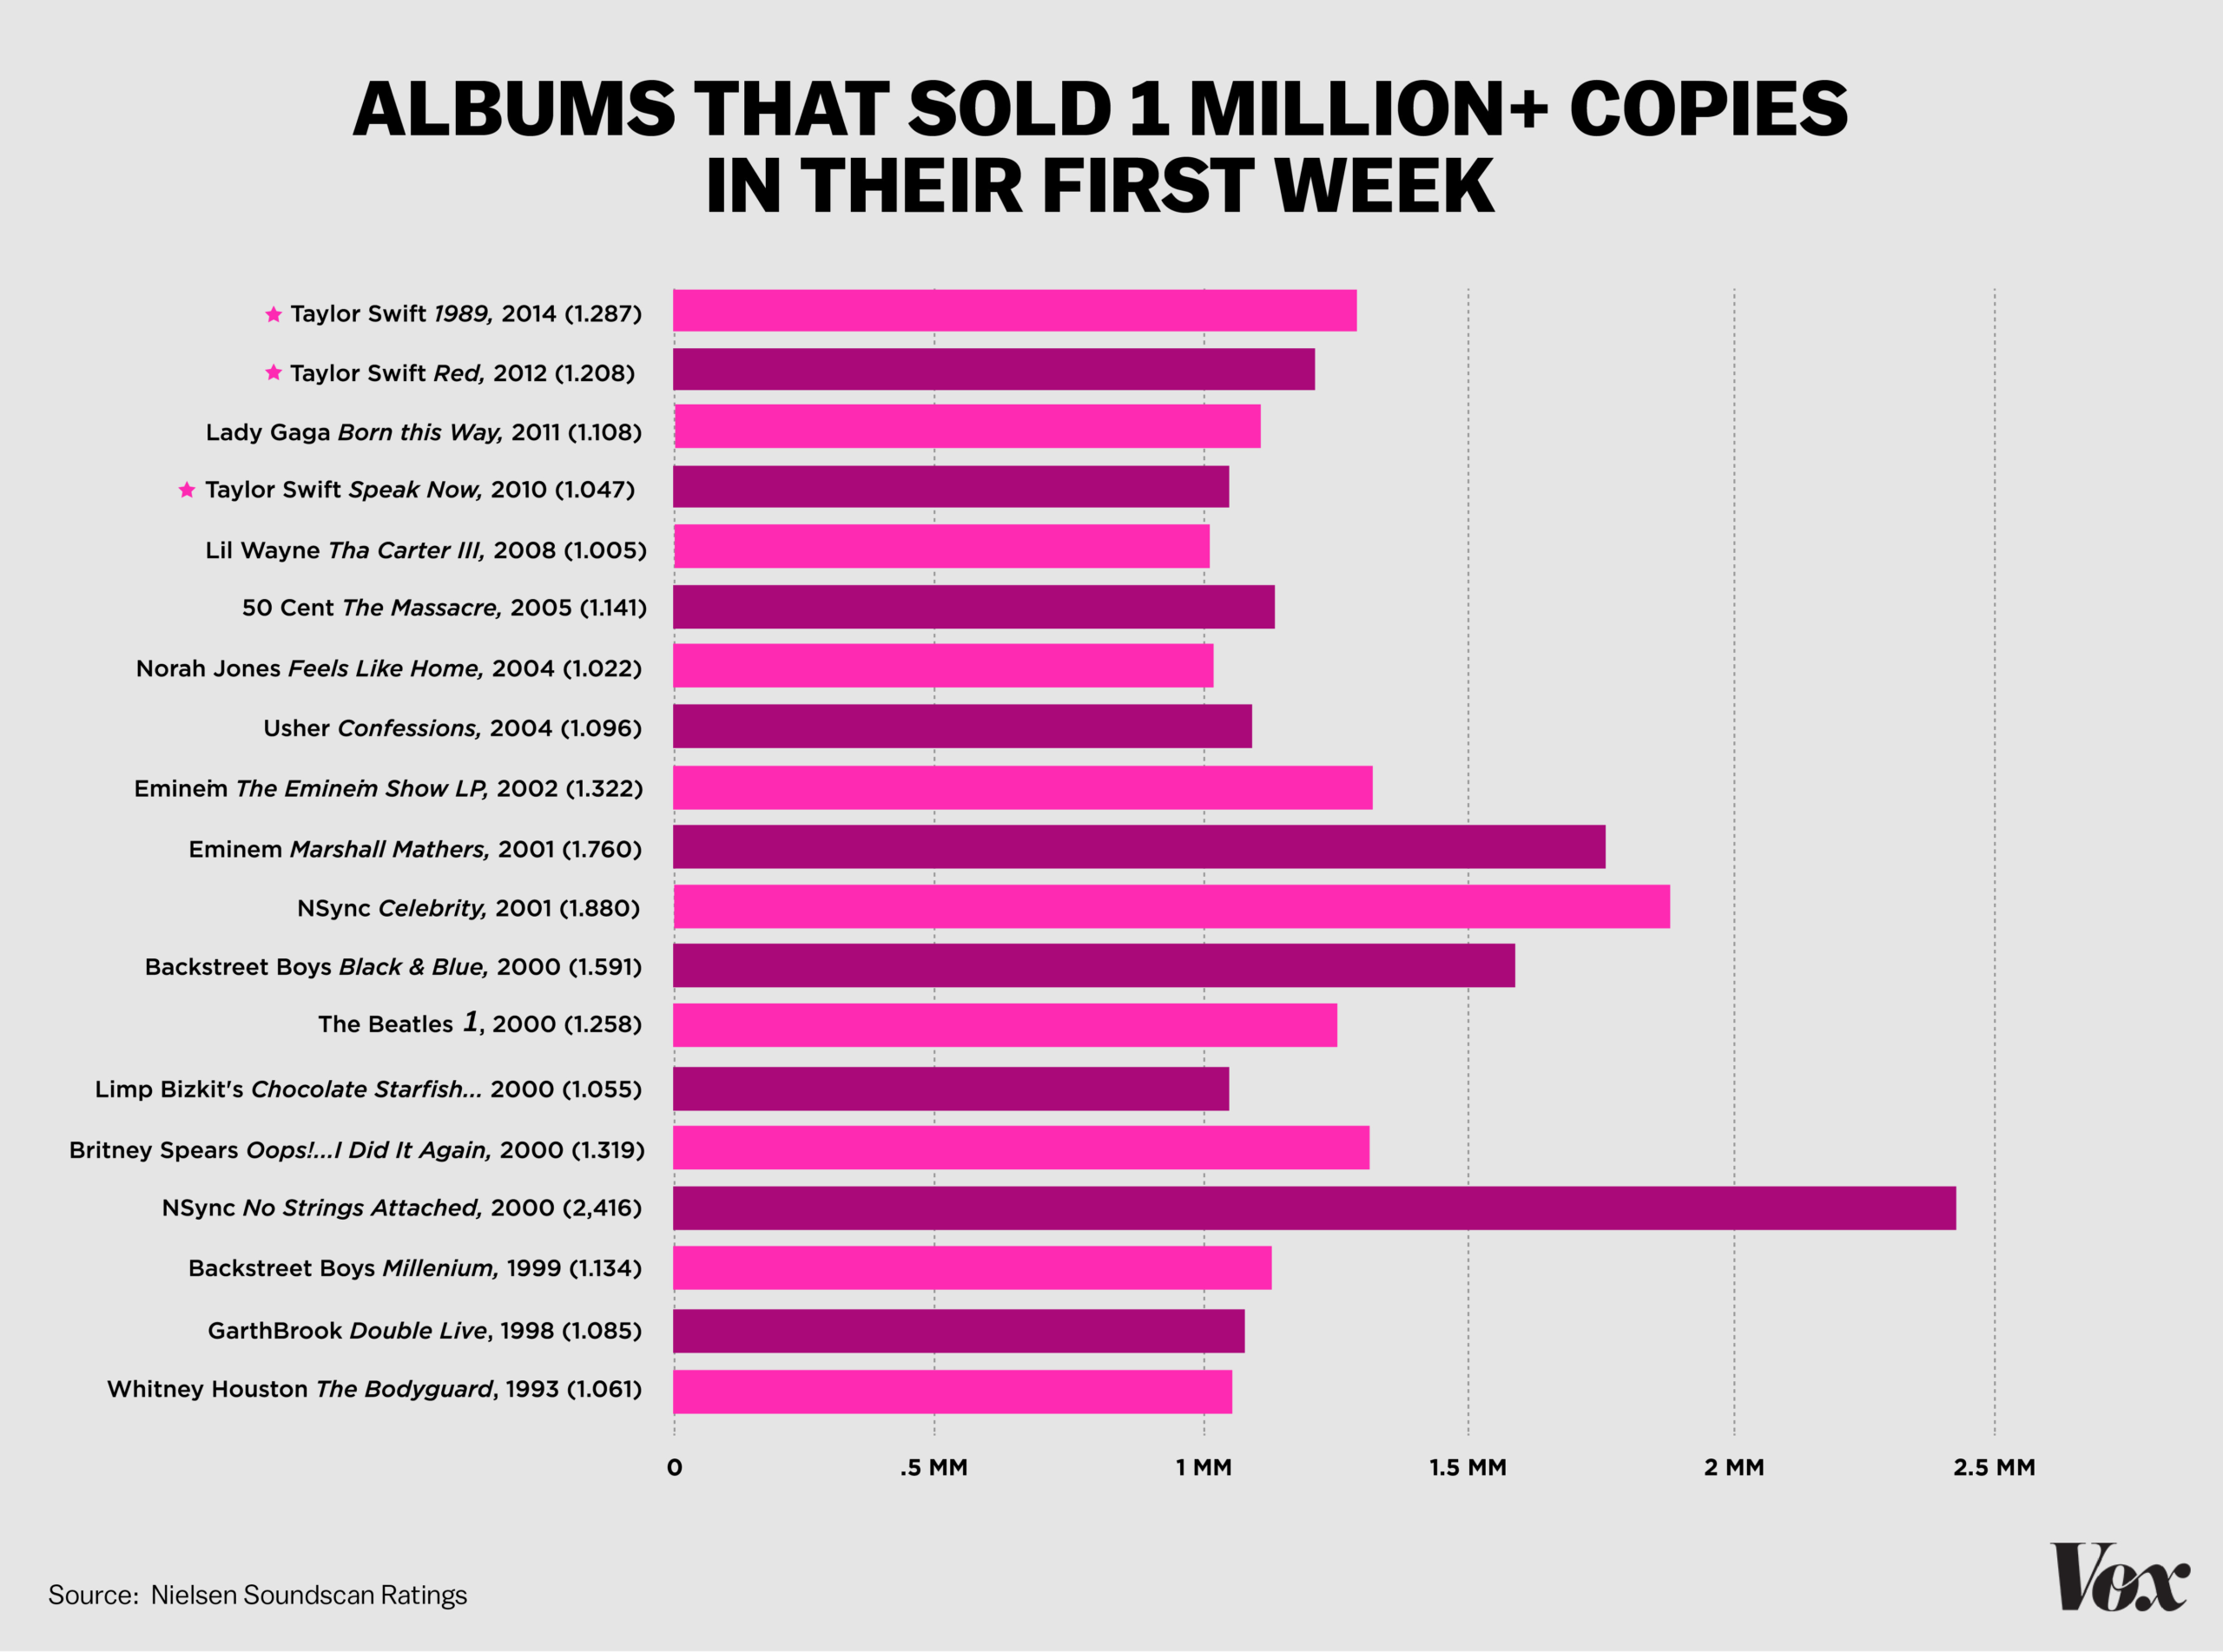 What album has sold the most copies?